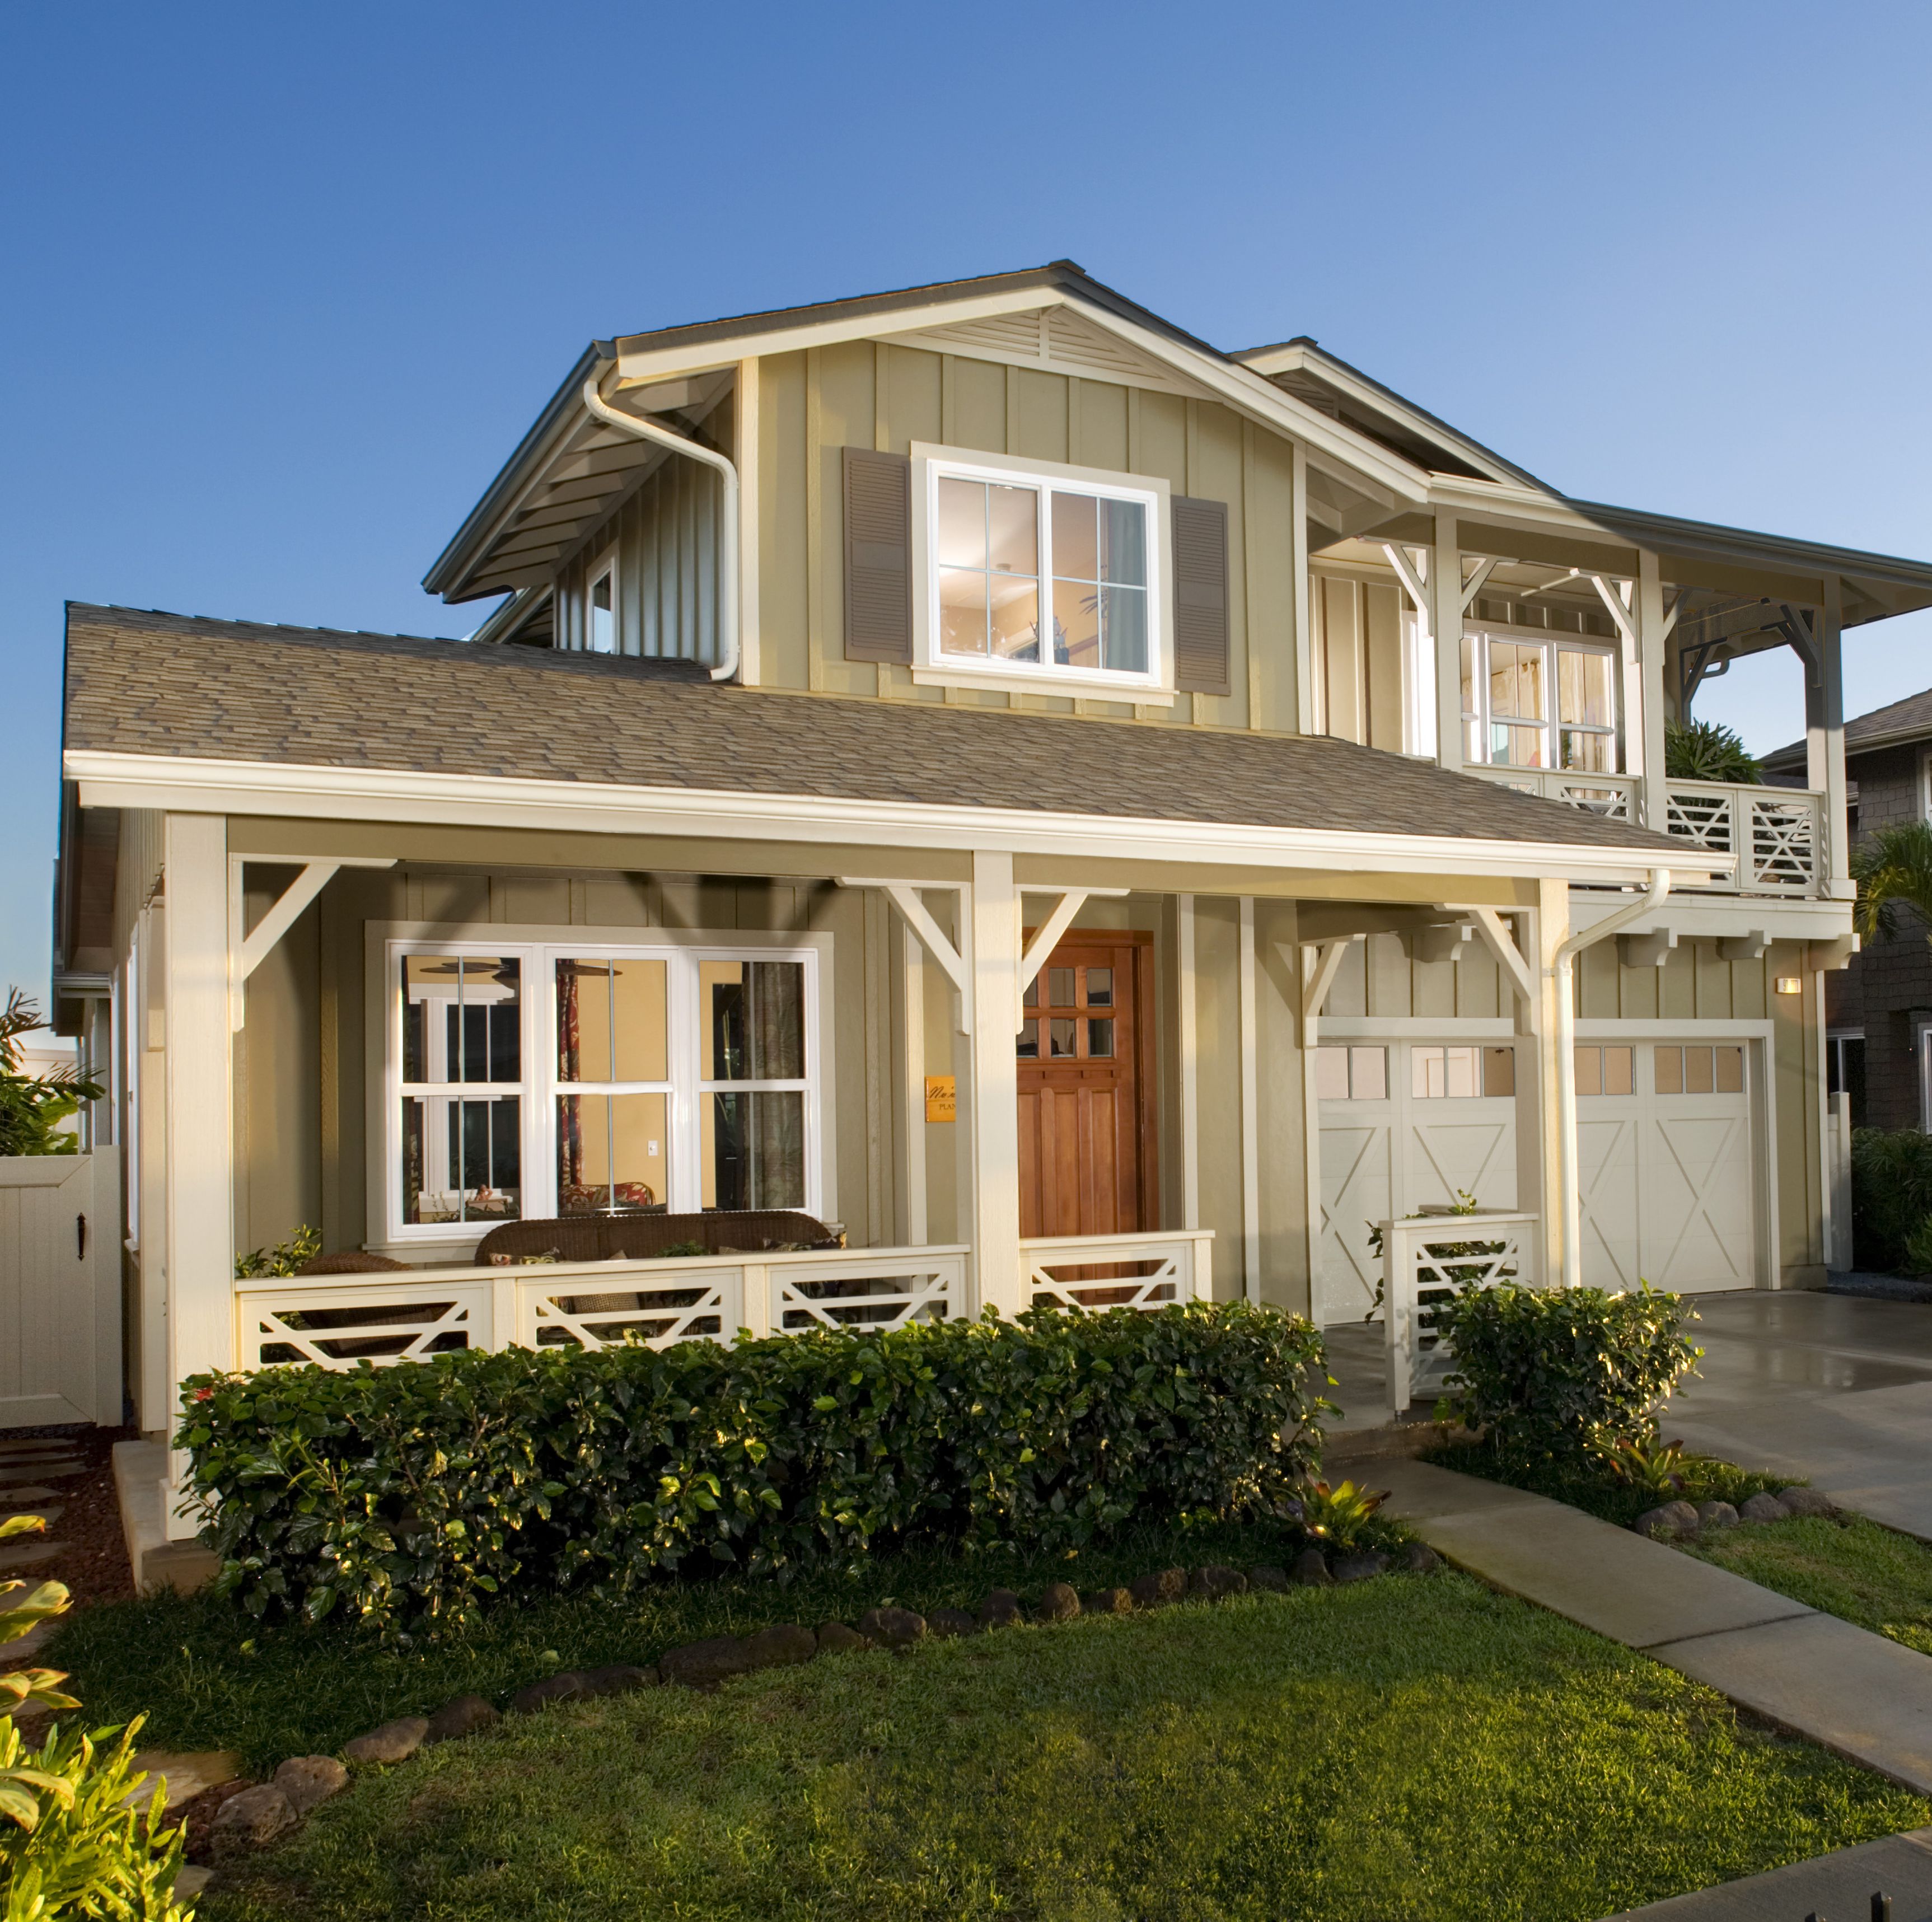 Craftsman house style – what is it and how to achieve it